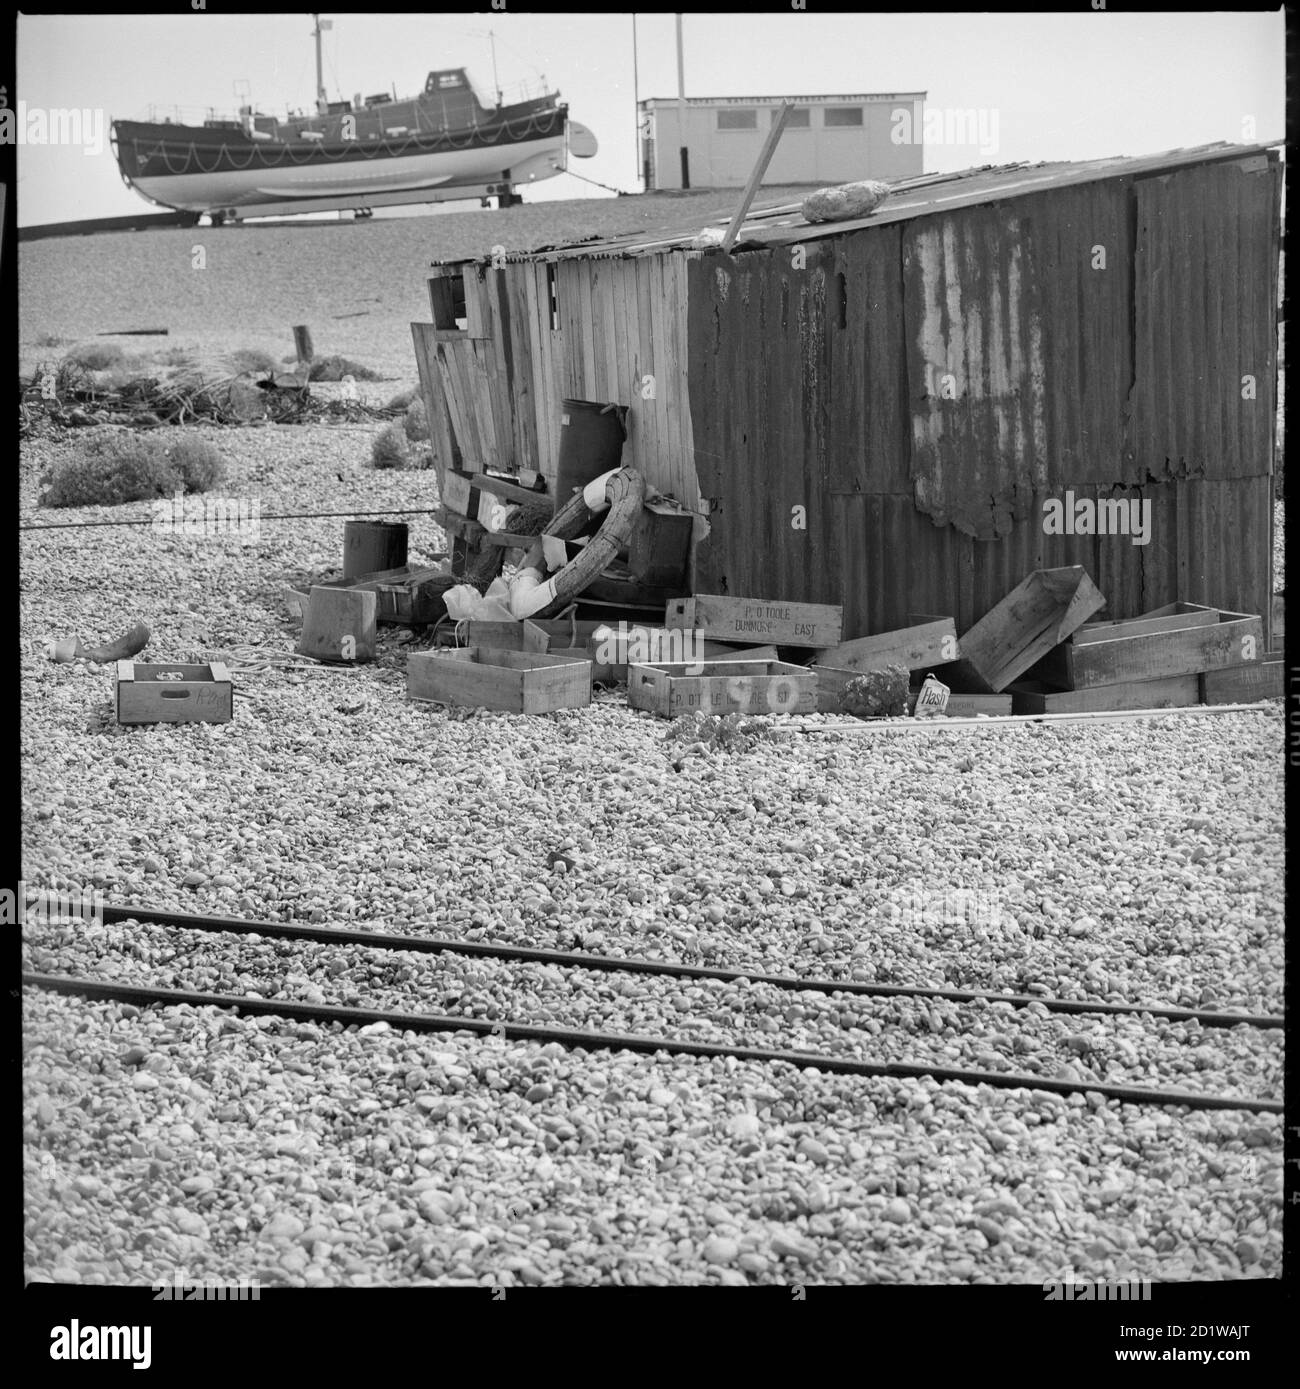 Dungeness, Lydd, Shepway, Kent. A shack on the beach at Dungeness with the RNLI lifeboat in the background. Stock Photo